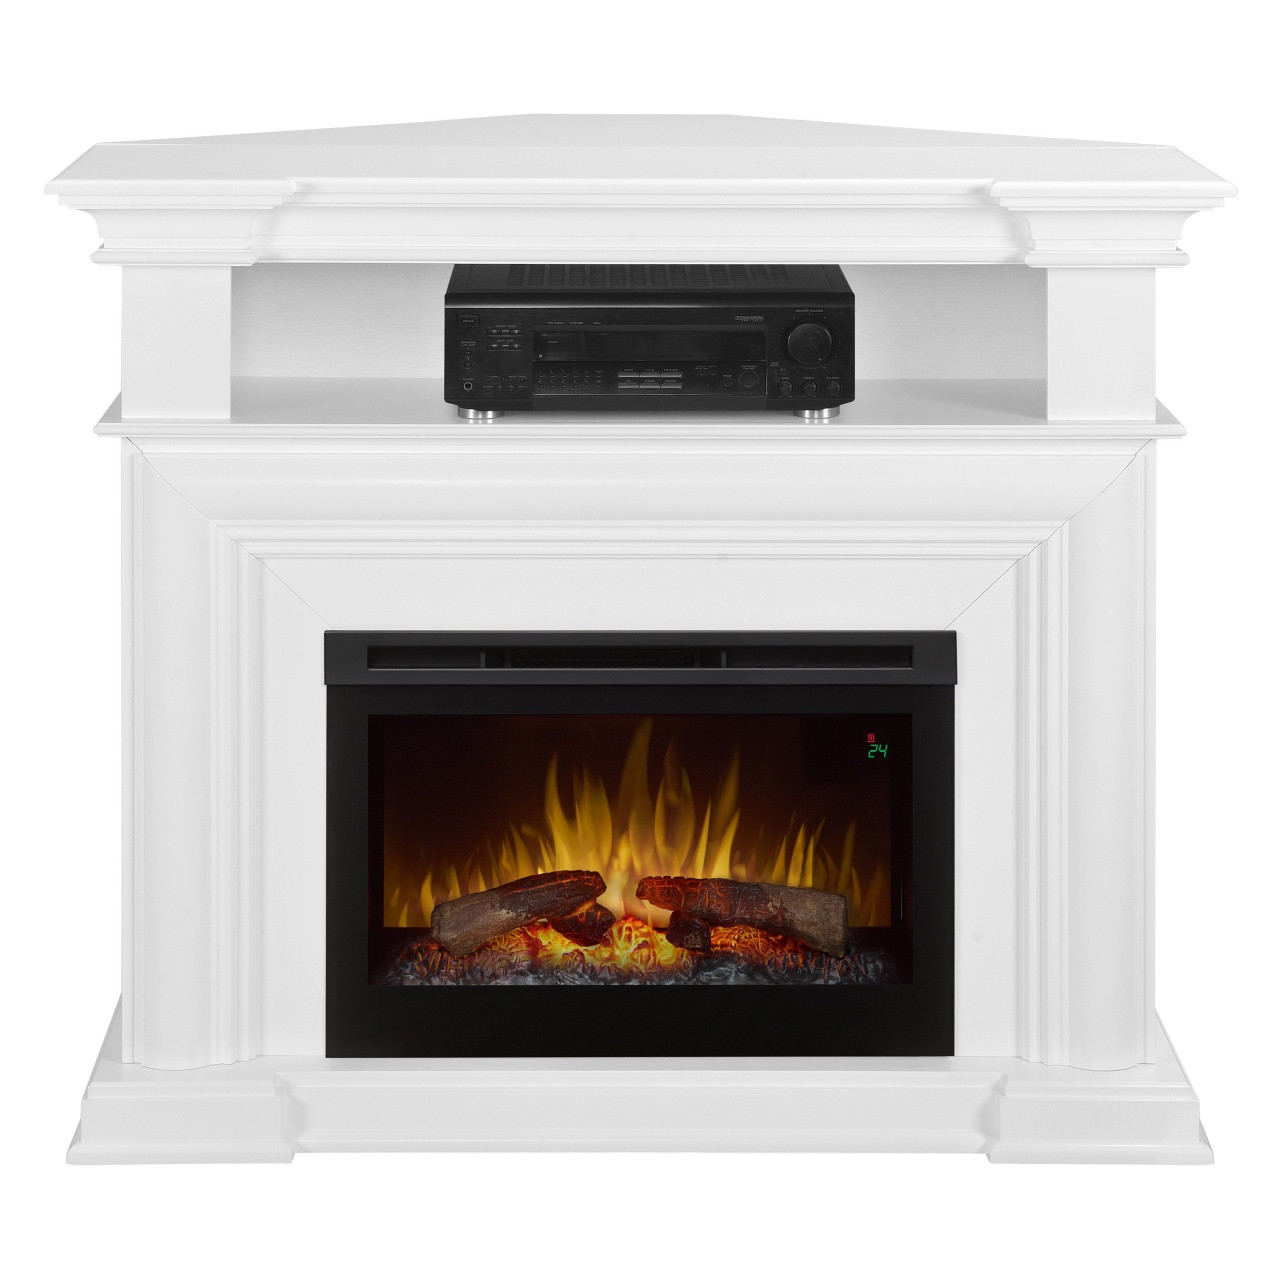 Heat N Glo Electric Fireplace
 Decorated Fireplace Mantels – FIREPLACE IDEAS